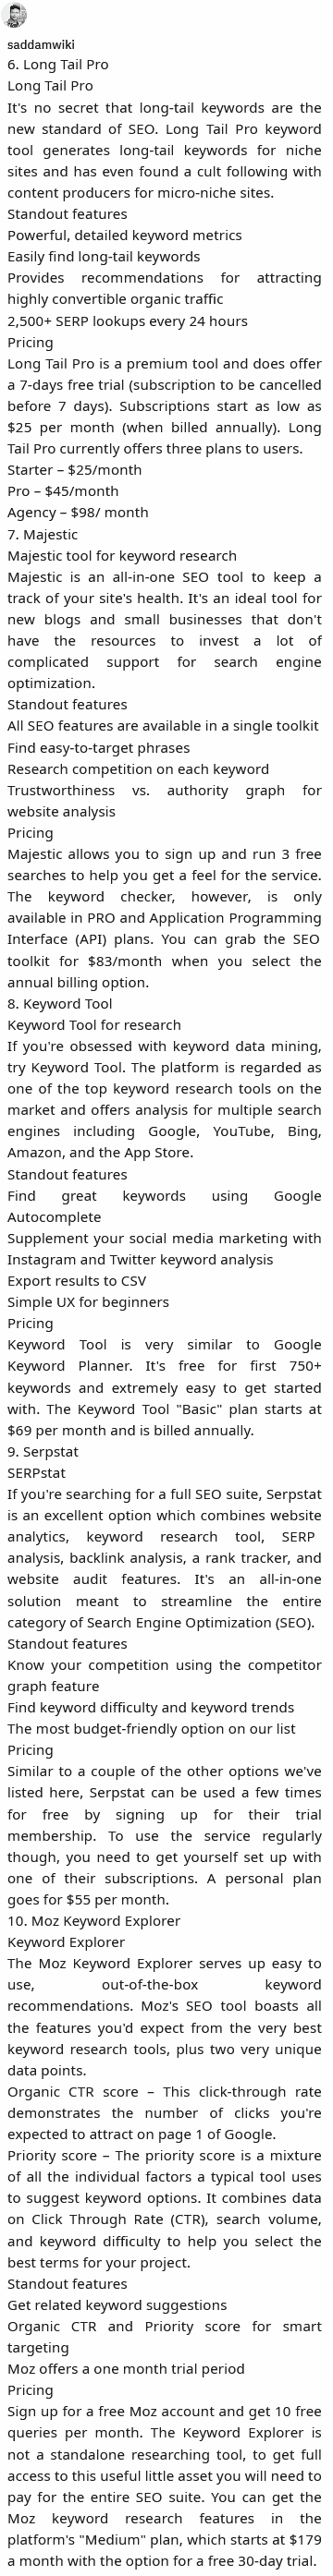 best free tools for keyword research